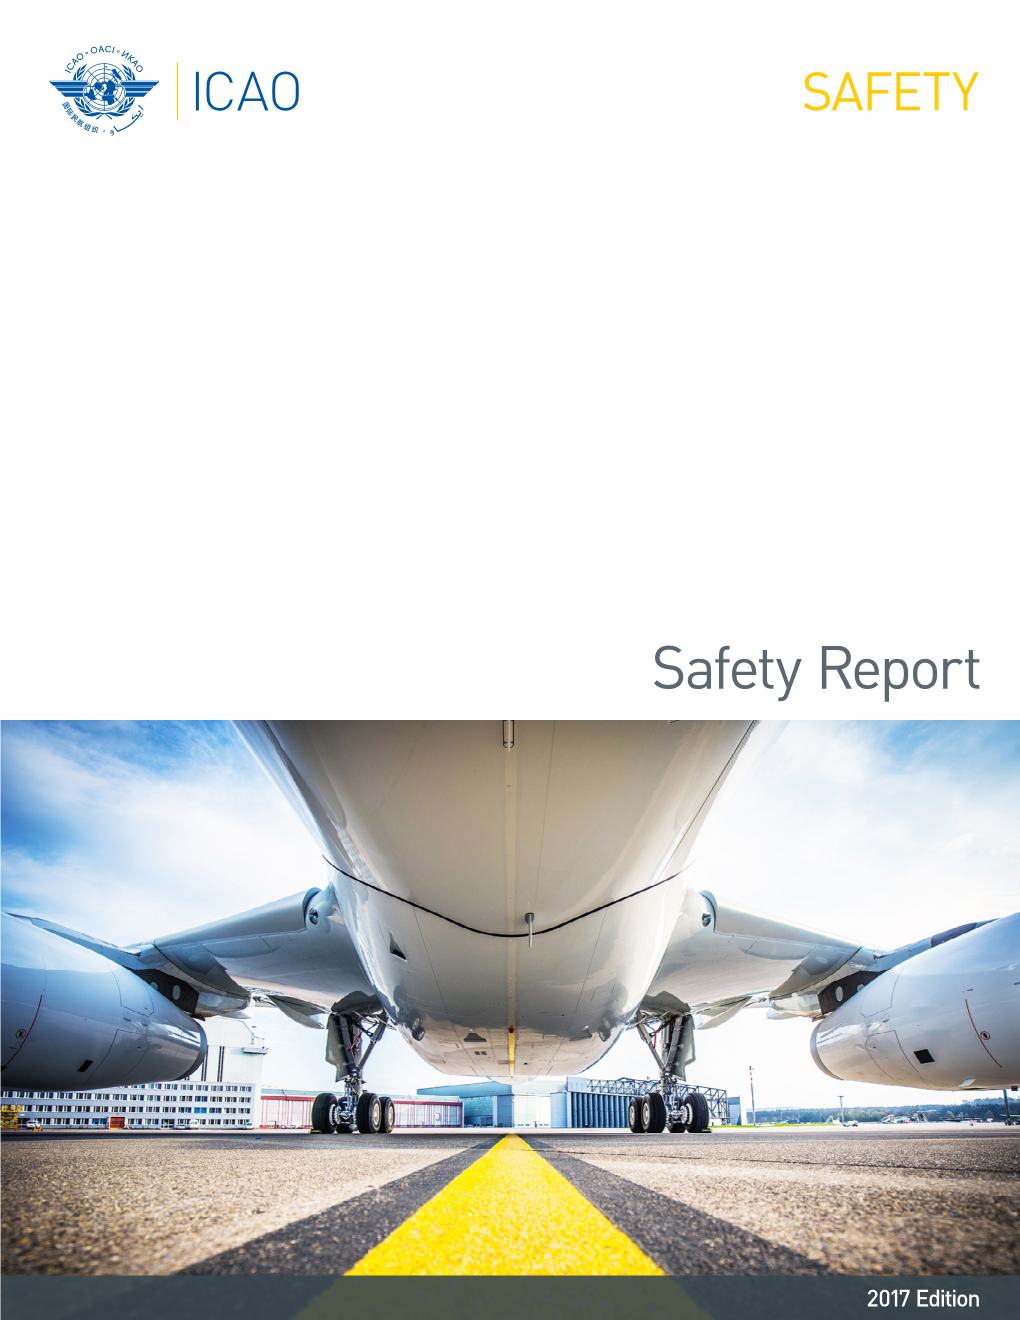 ICAO Safety Report 2017 Edition